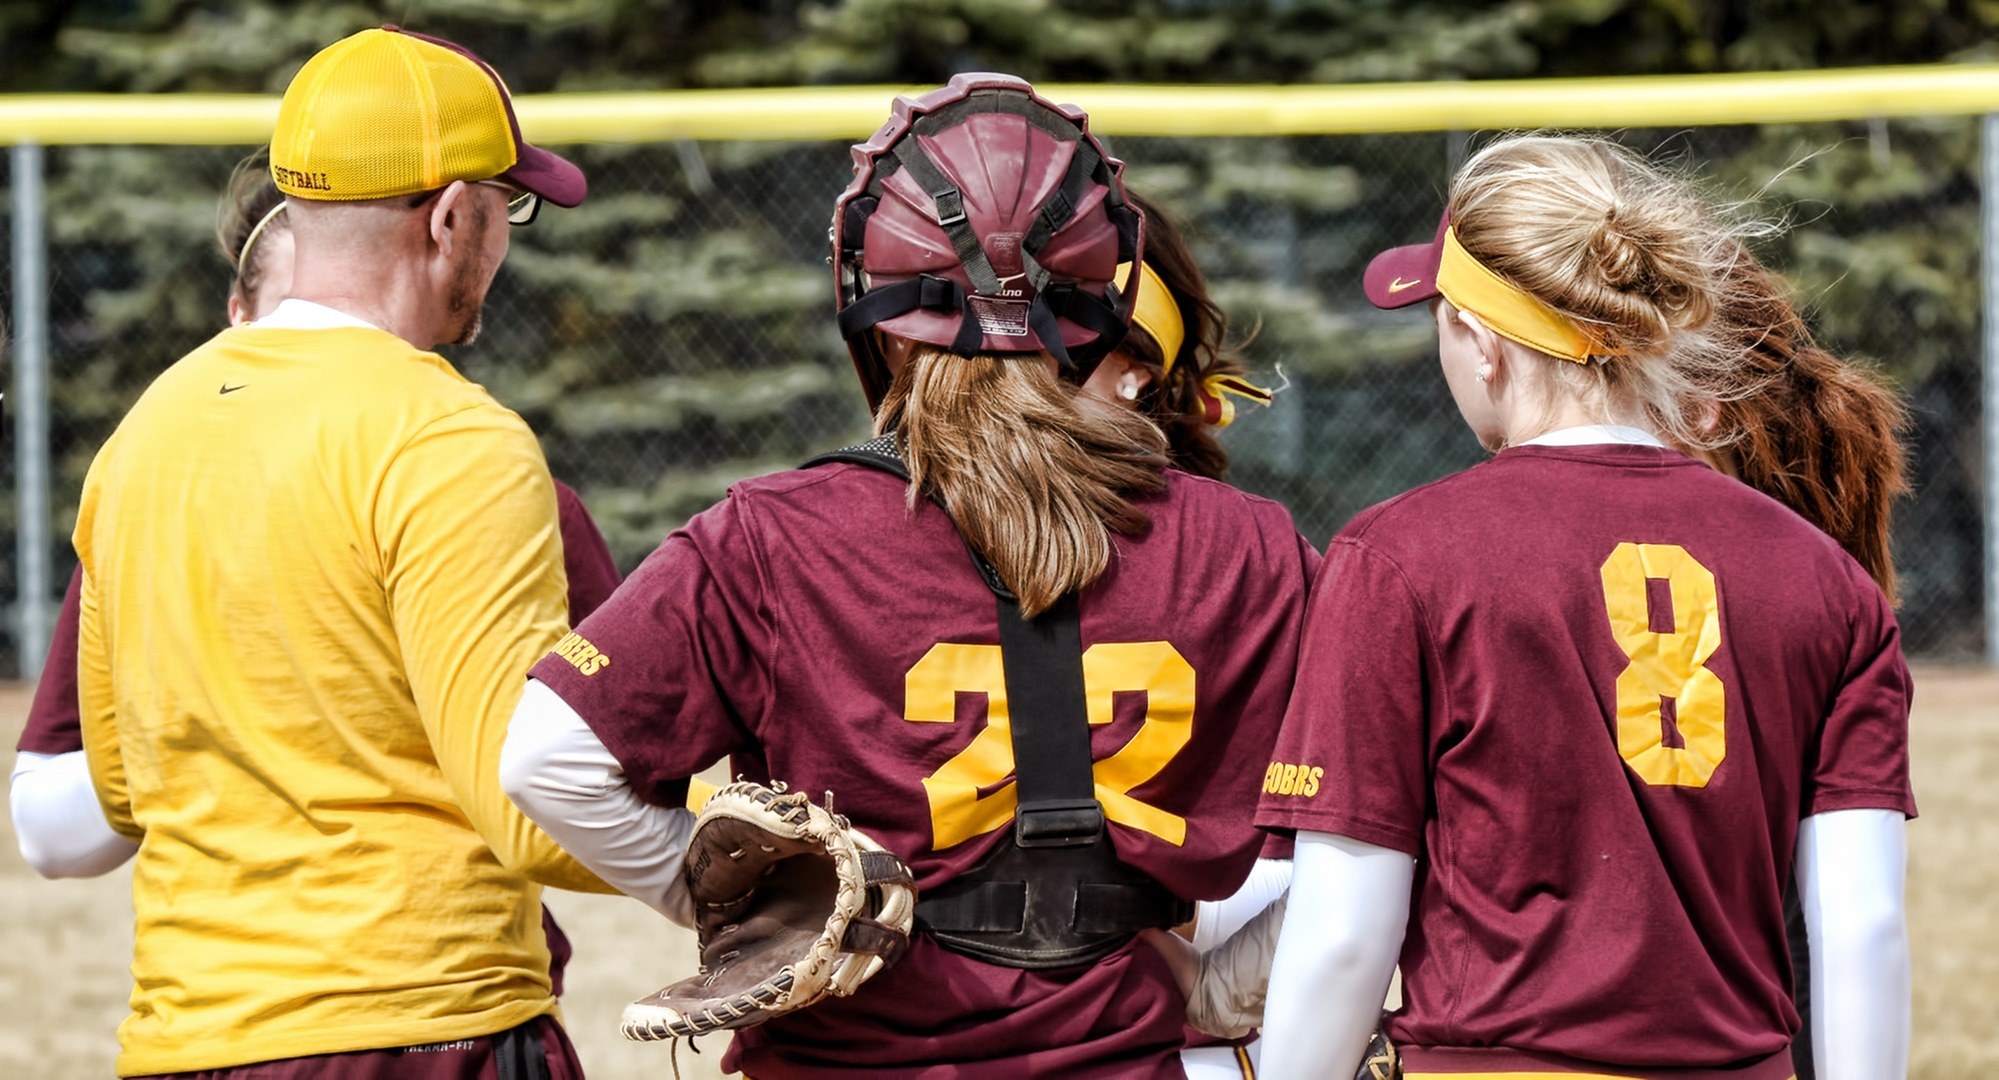 Concordia head coach Chad Slyter announced that the Cobbers will conduct their annual one-day fastpitch softball camp on Sunday, Mar. 11.